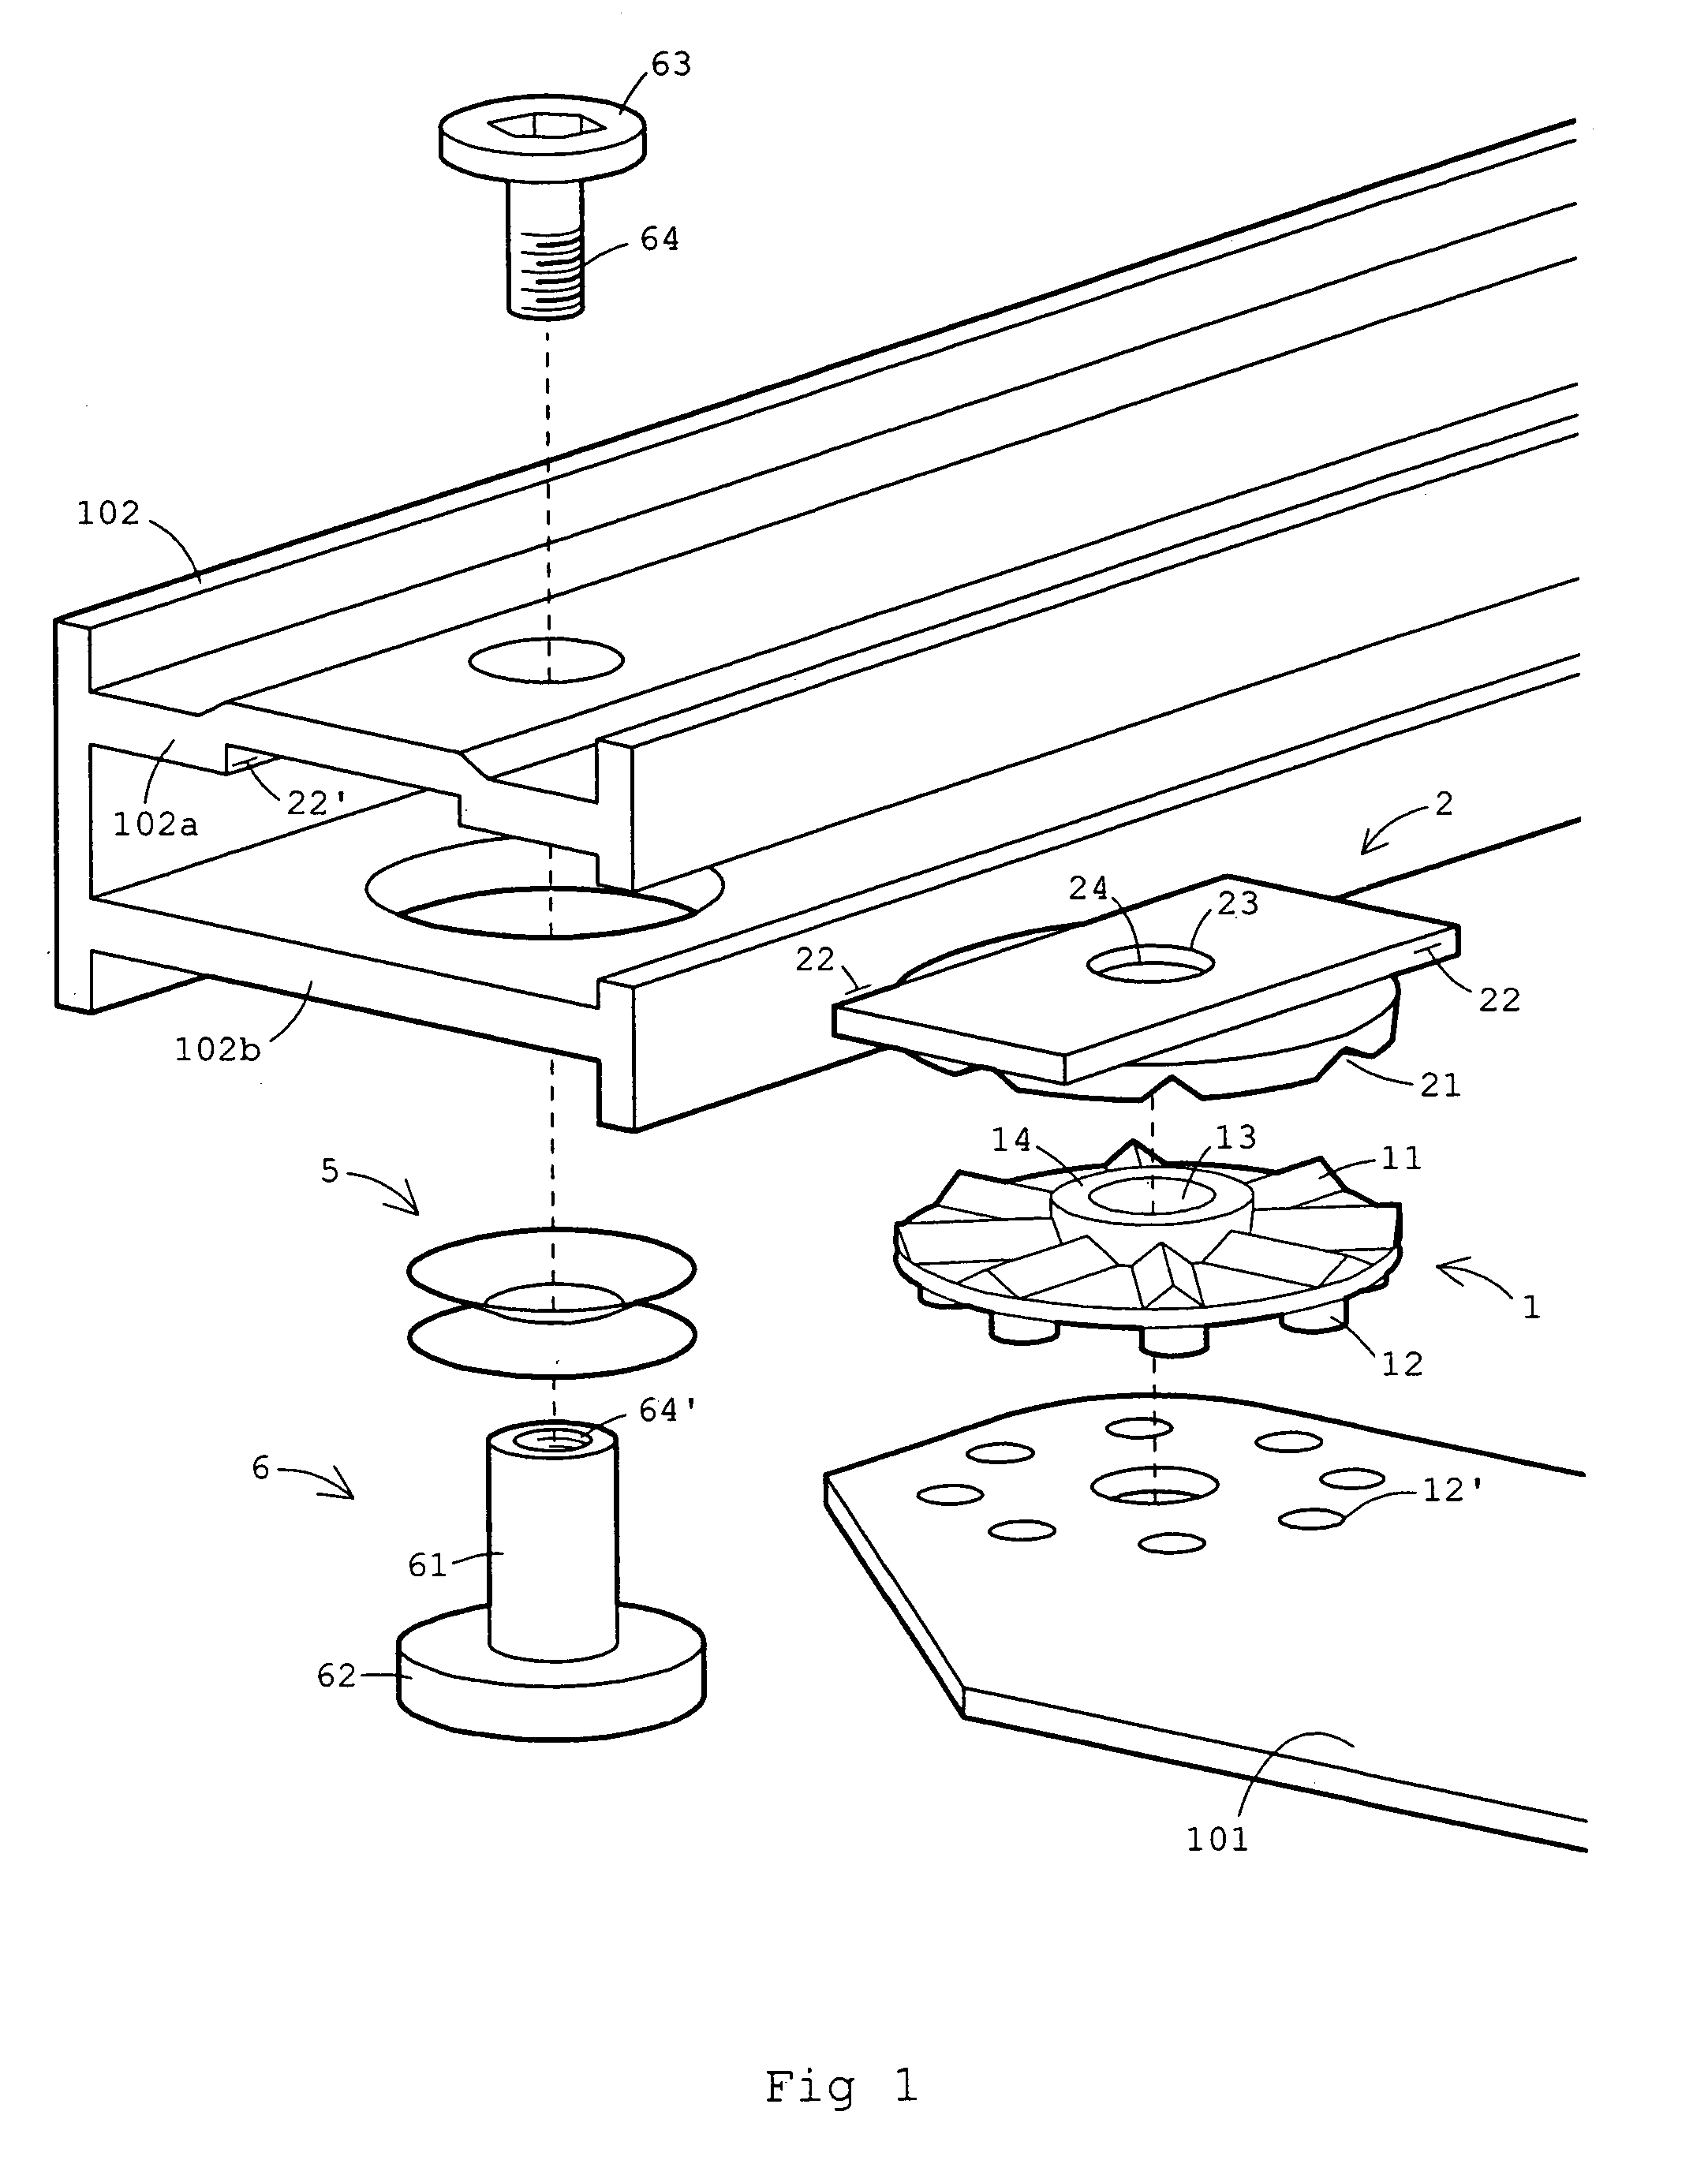 Snap locking angle adjustable device, in particular a carpenter's square